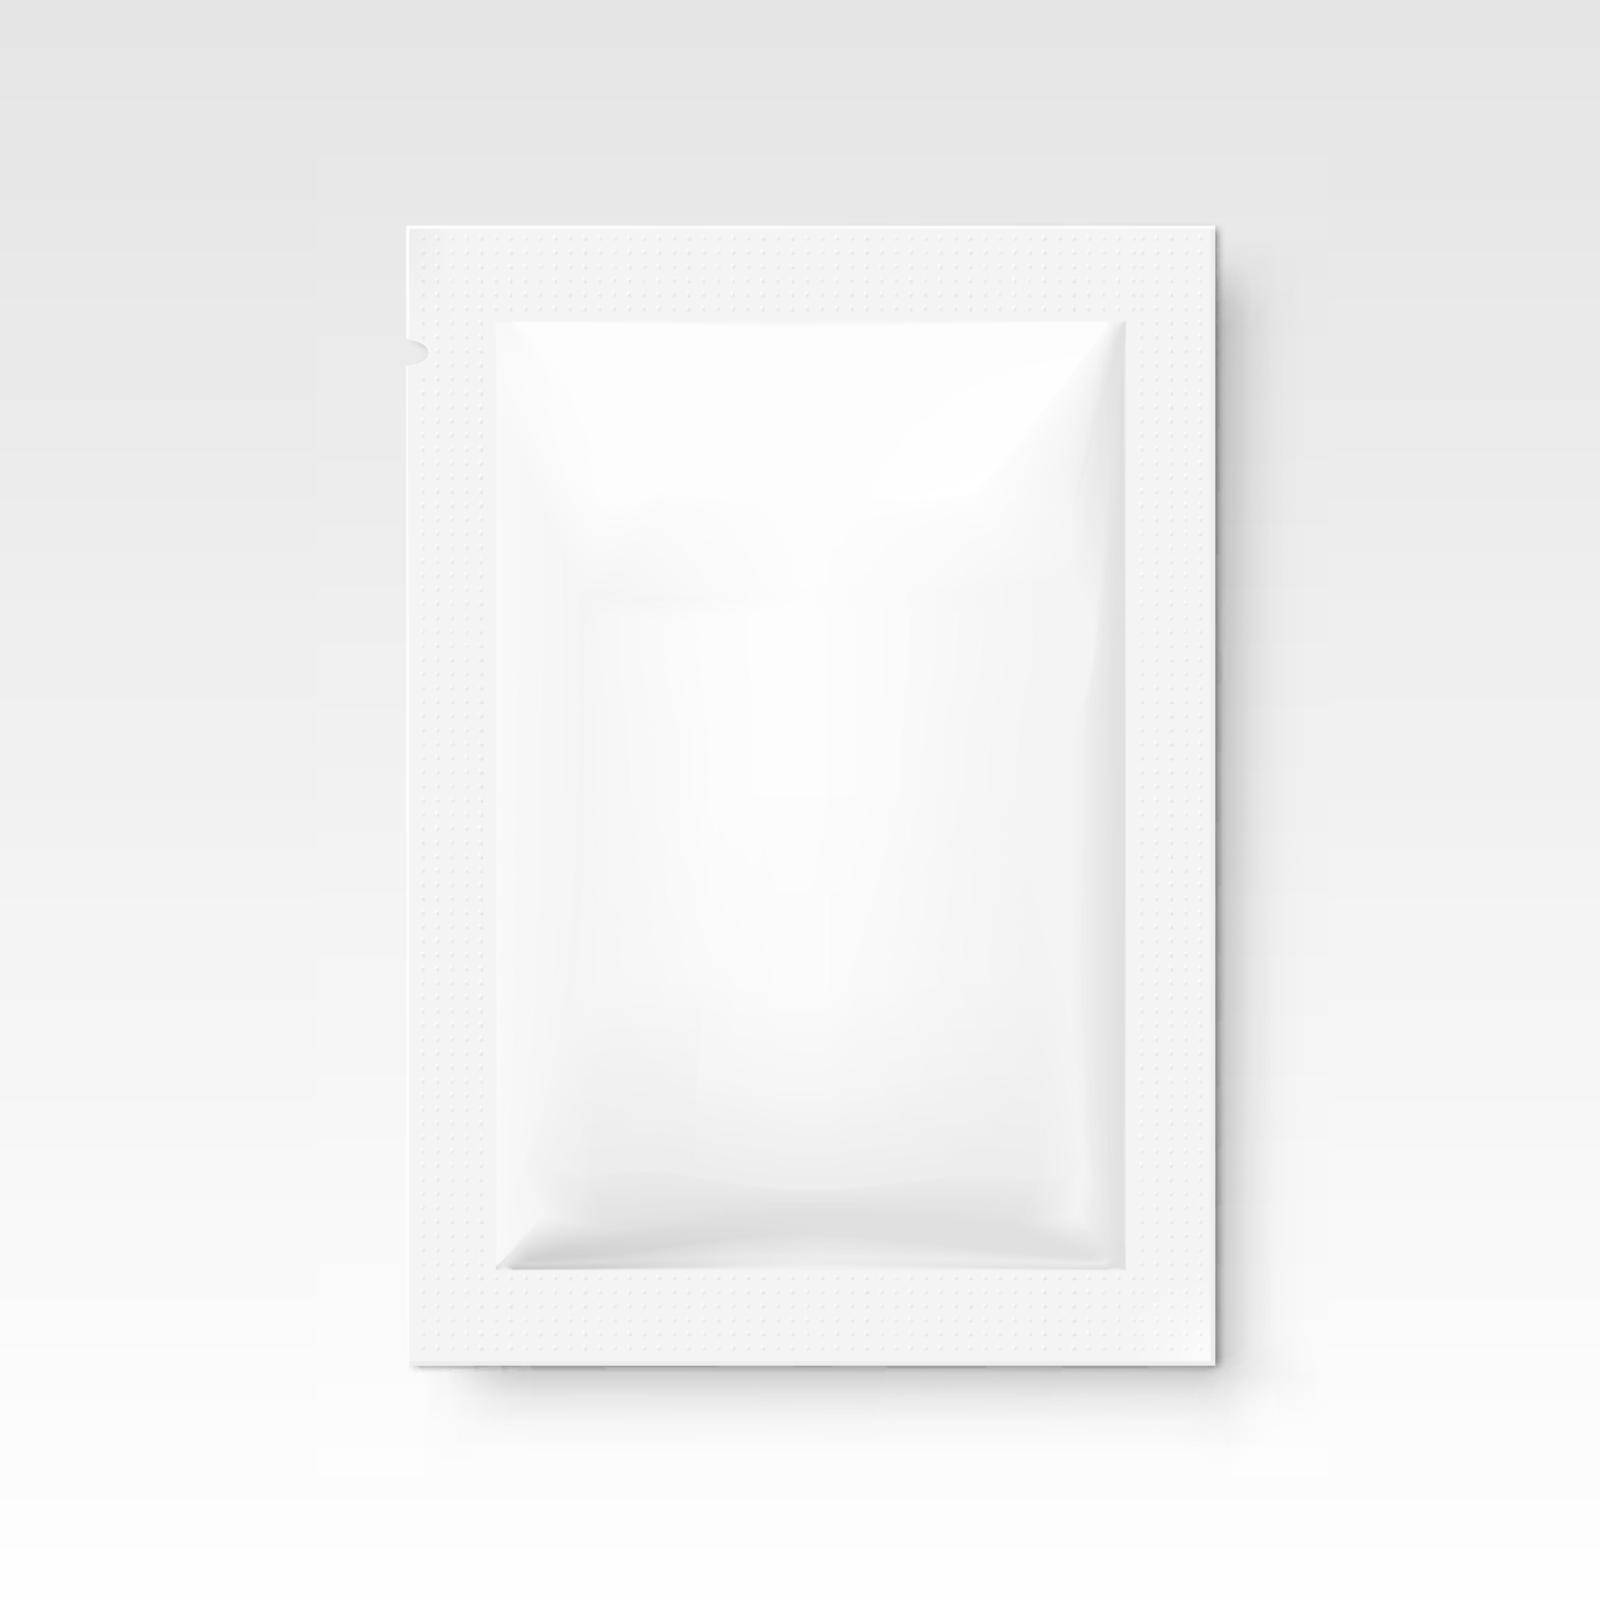 White Blank Clear Sachet For Food, Medical Or Cosmetics. EPS10 Vector